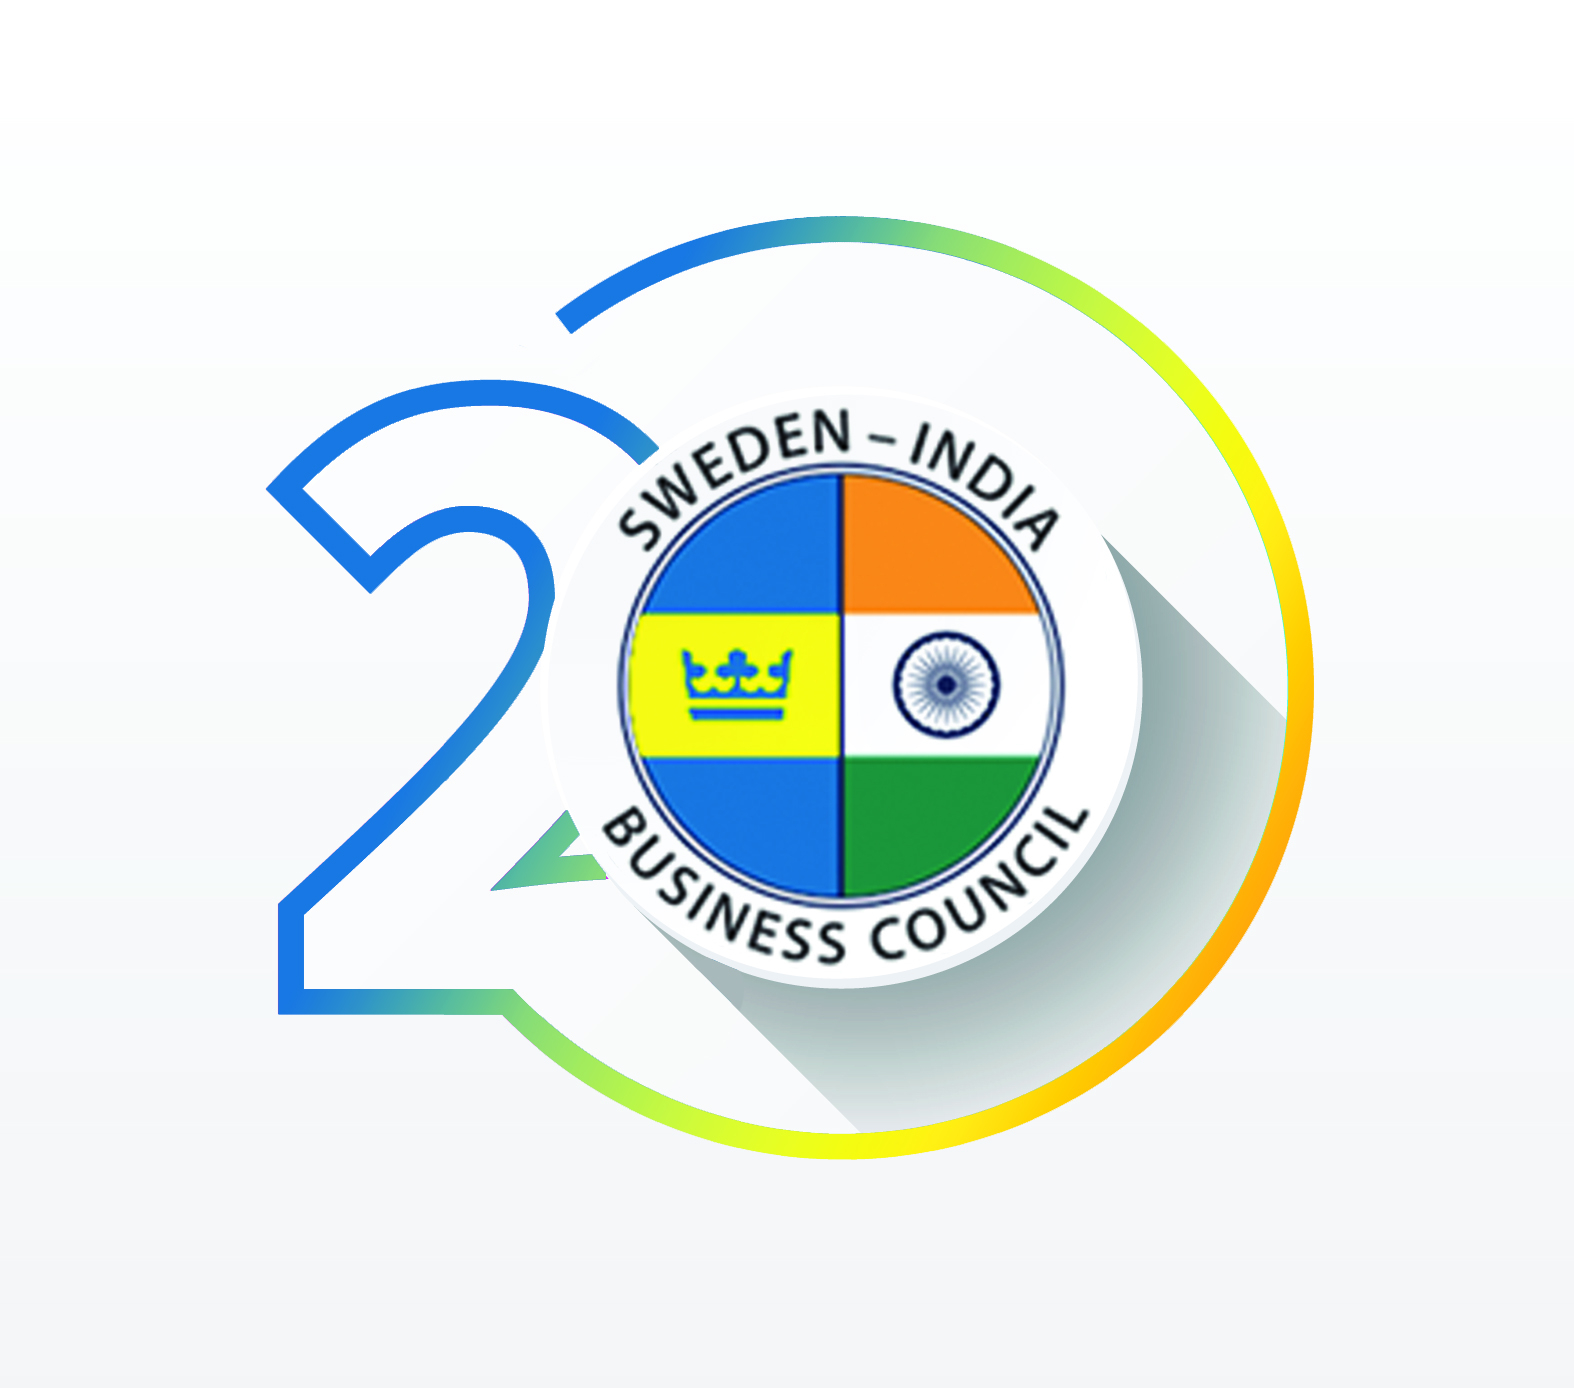 thumbnails 20 Year Anniversary of the Sweden-India Business Council